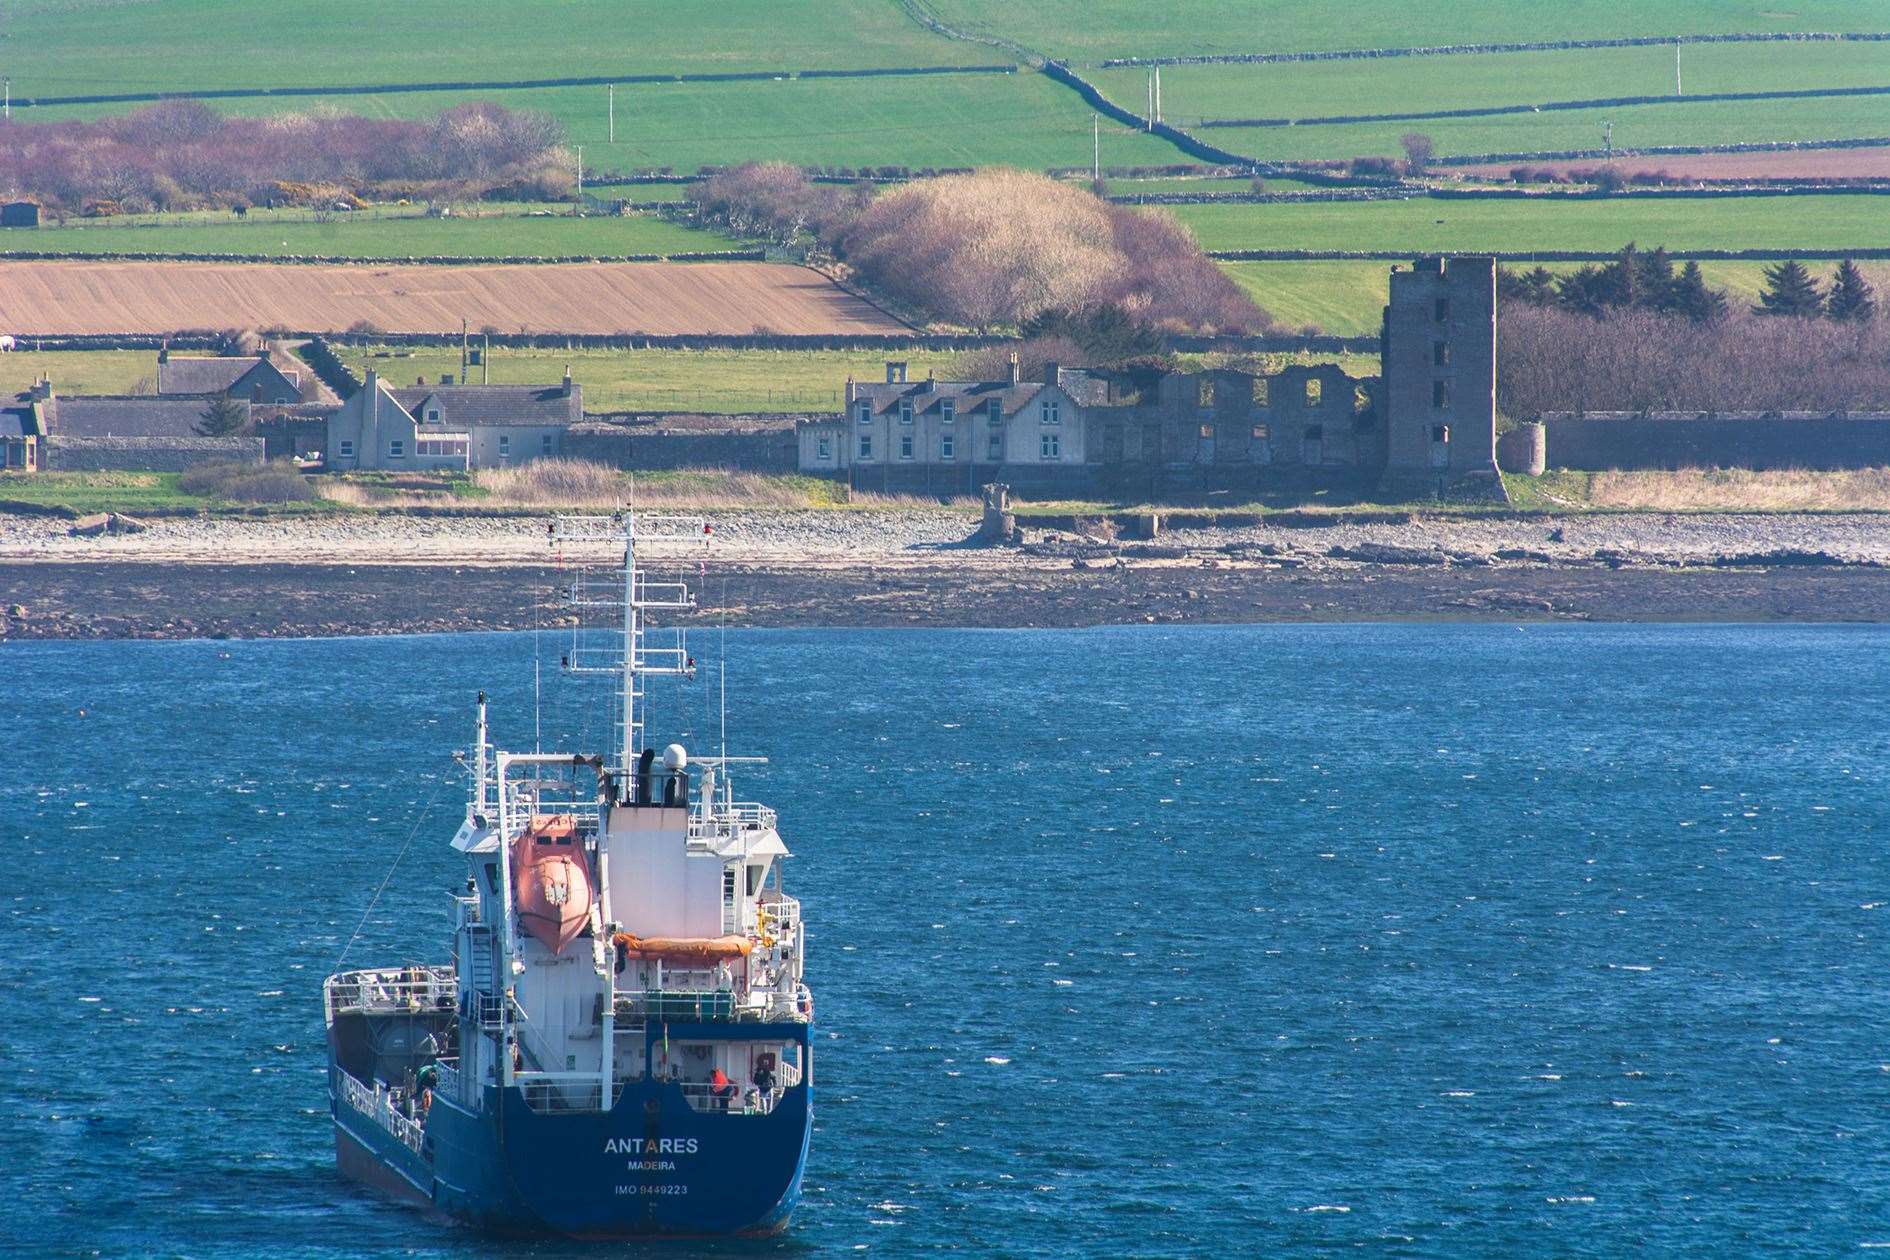 Thurso Castle from behind Holburn Head lighthouse, pictured by Fergus Corsie from Thurso.